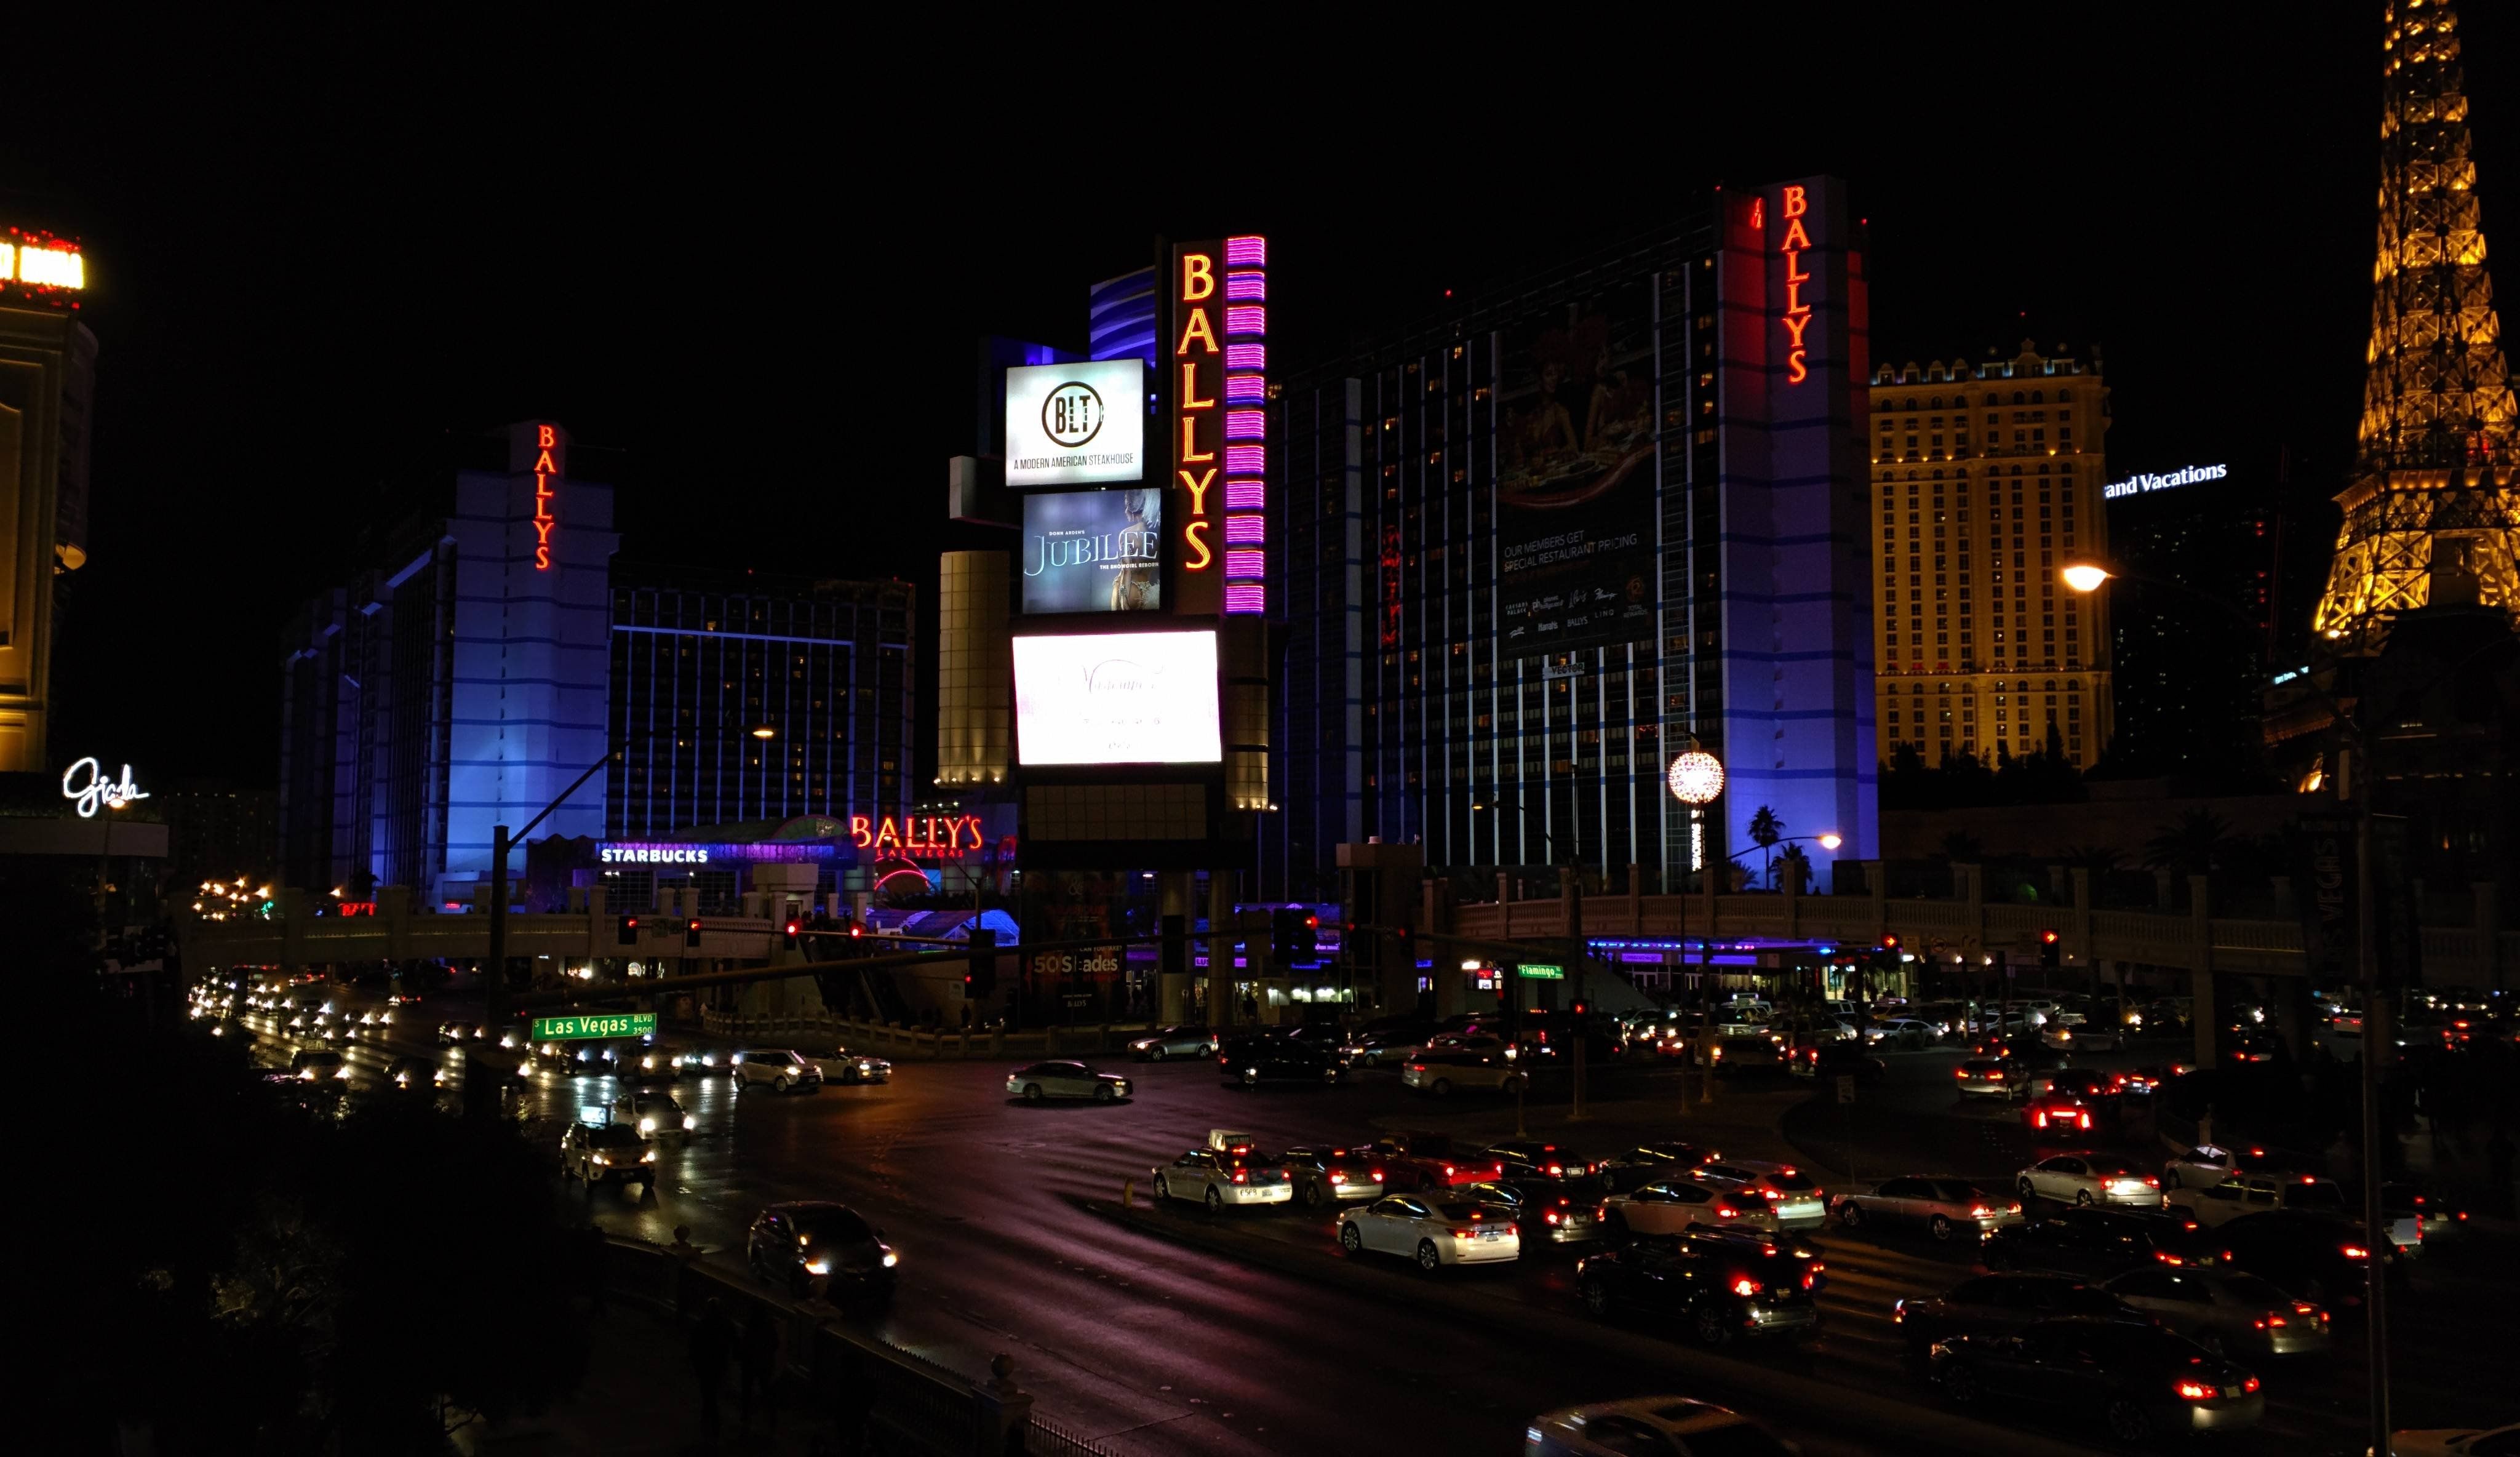 A city street with many cars and neon lights - Las Vegas